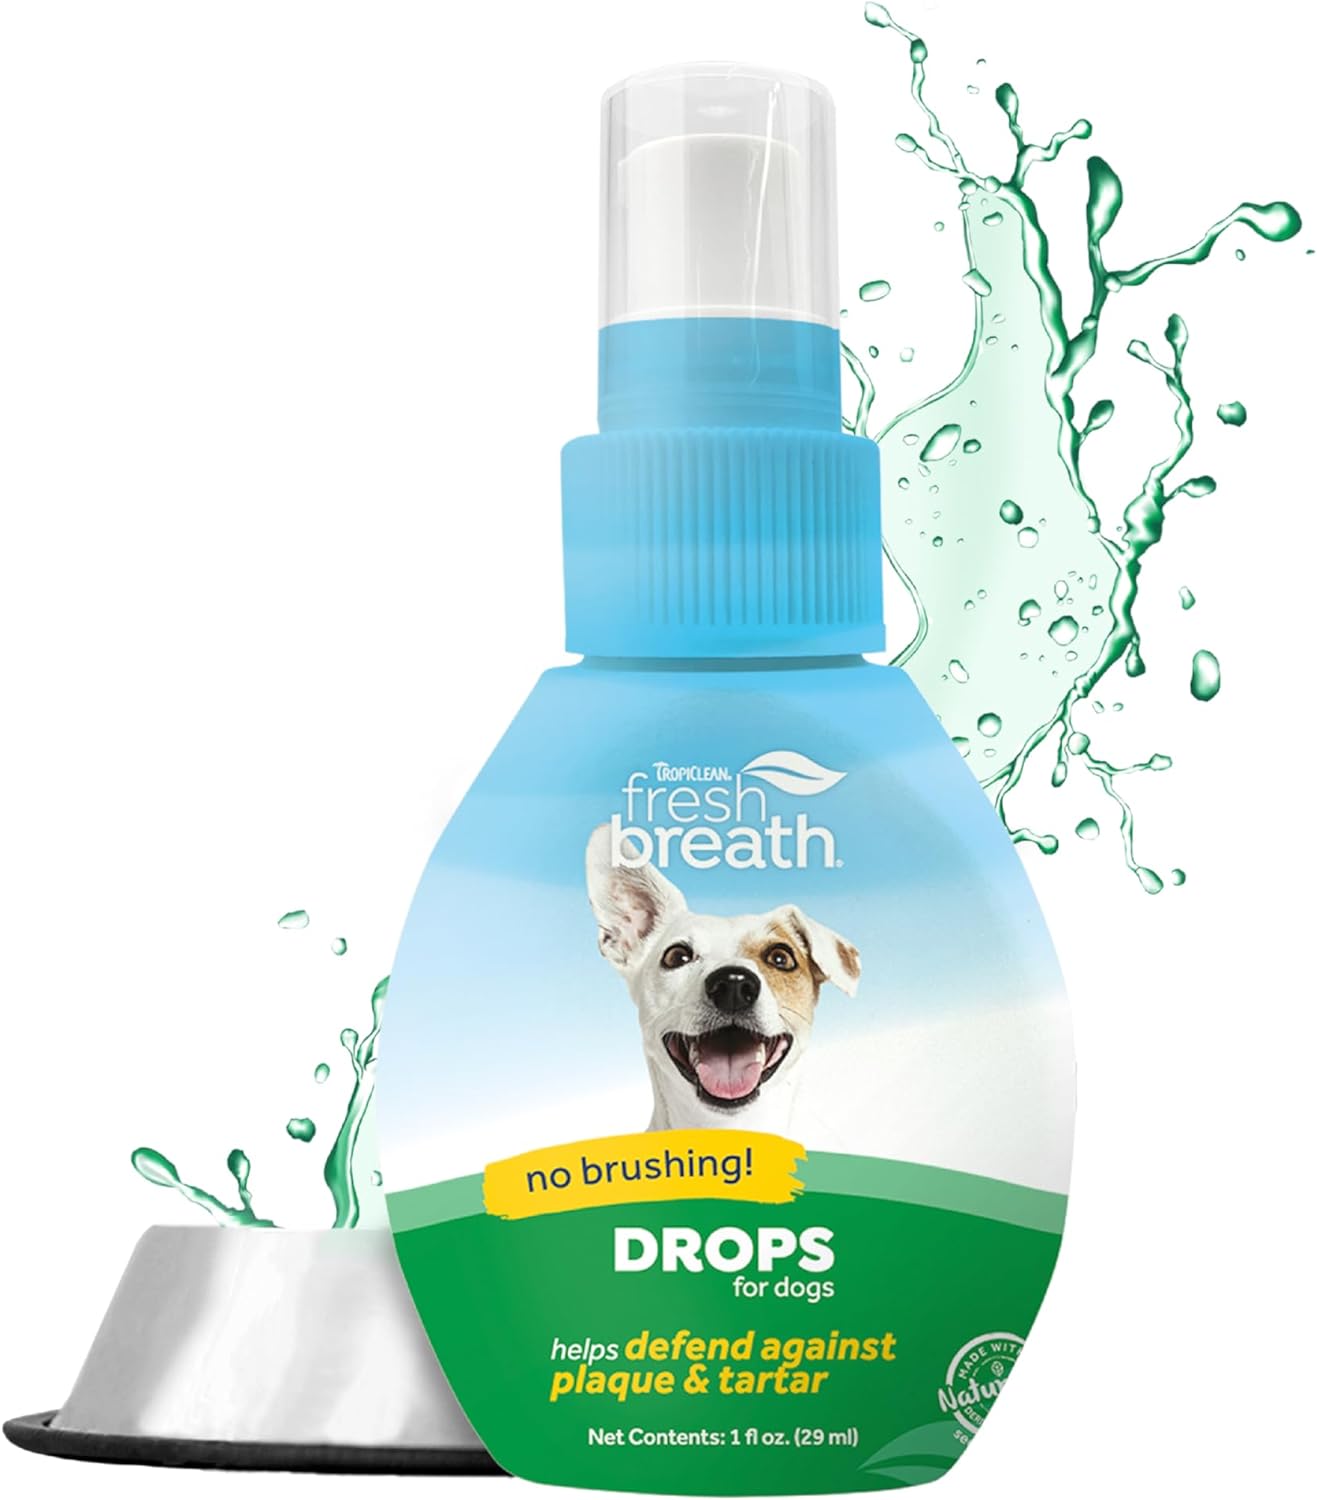 TropiClean Fresh Breath Dog Teeth Cleaning Drops - Dental Care Solution - Breath Freshener Oral Care - Drops Mouthwash for Bad, Smelly Dog Breath - Derived from Natural Ingredients, Original, 59ml?FBDR2.2Z